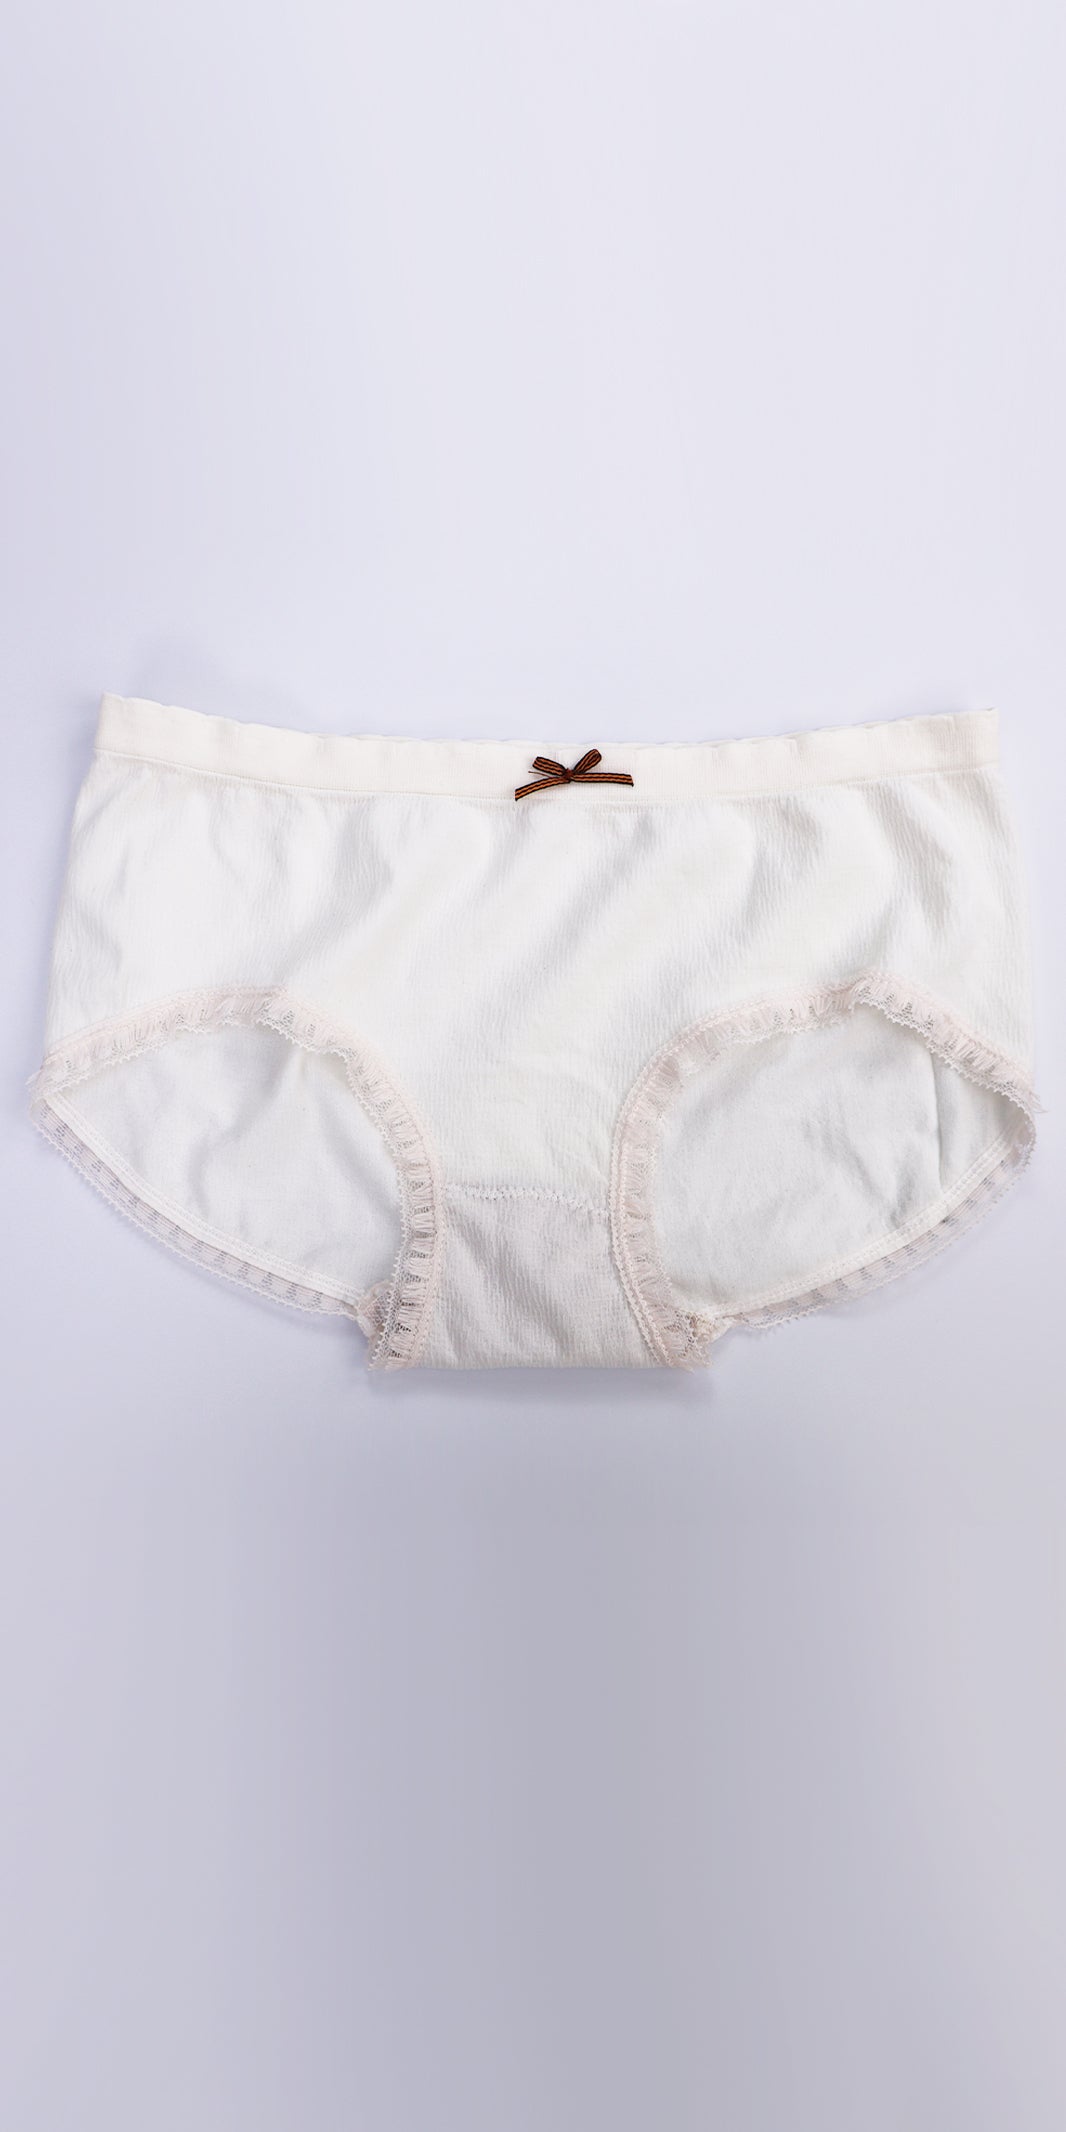 Six Pieces In Box Mid Waist Cotton Ribbed Panties